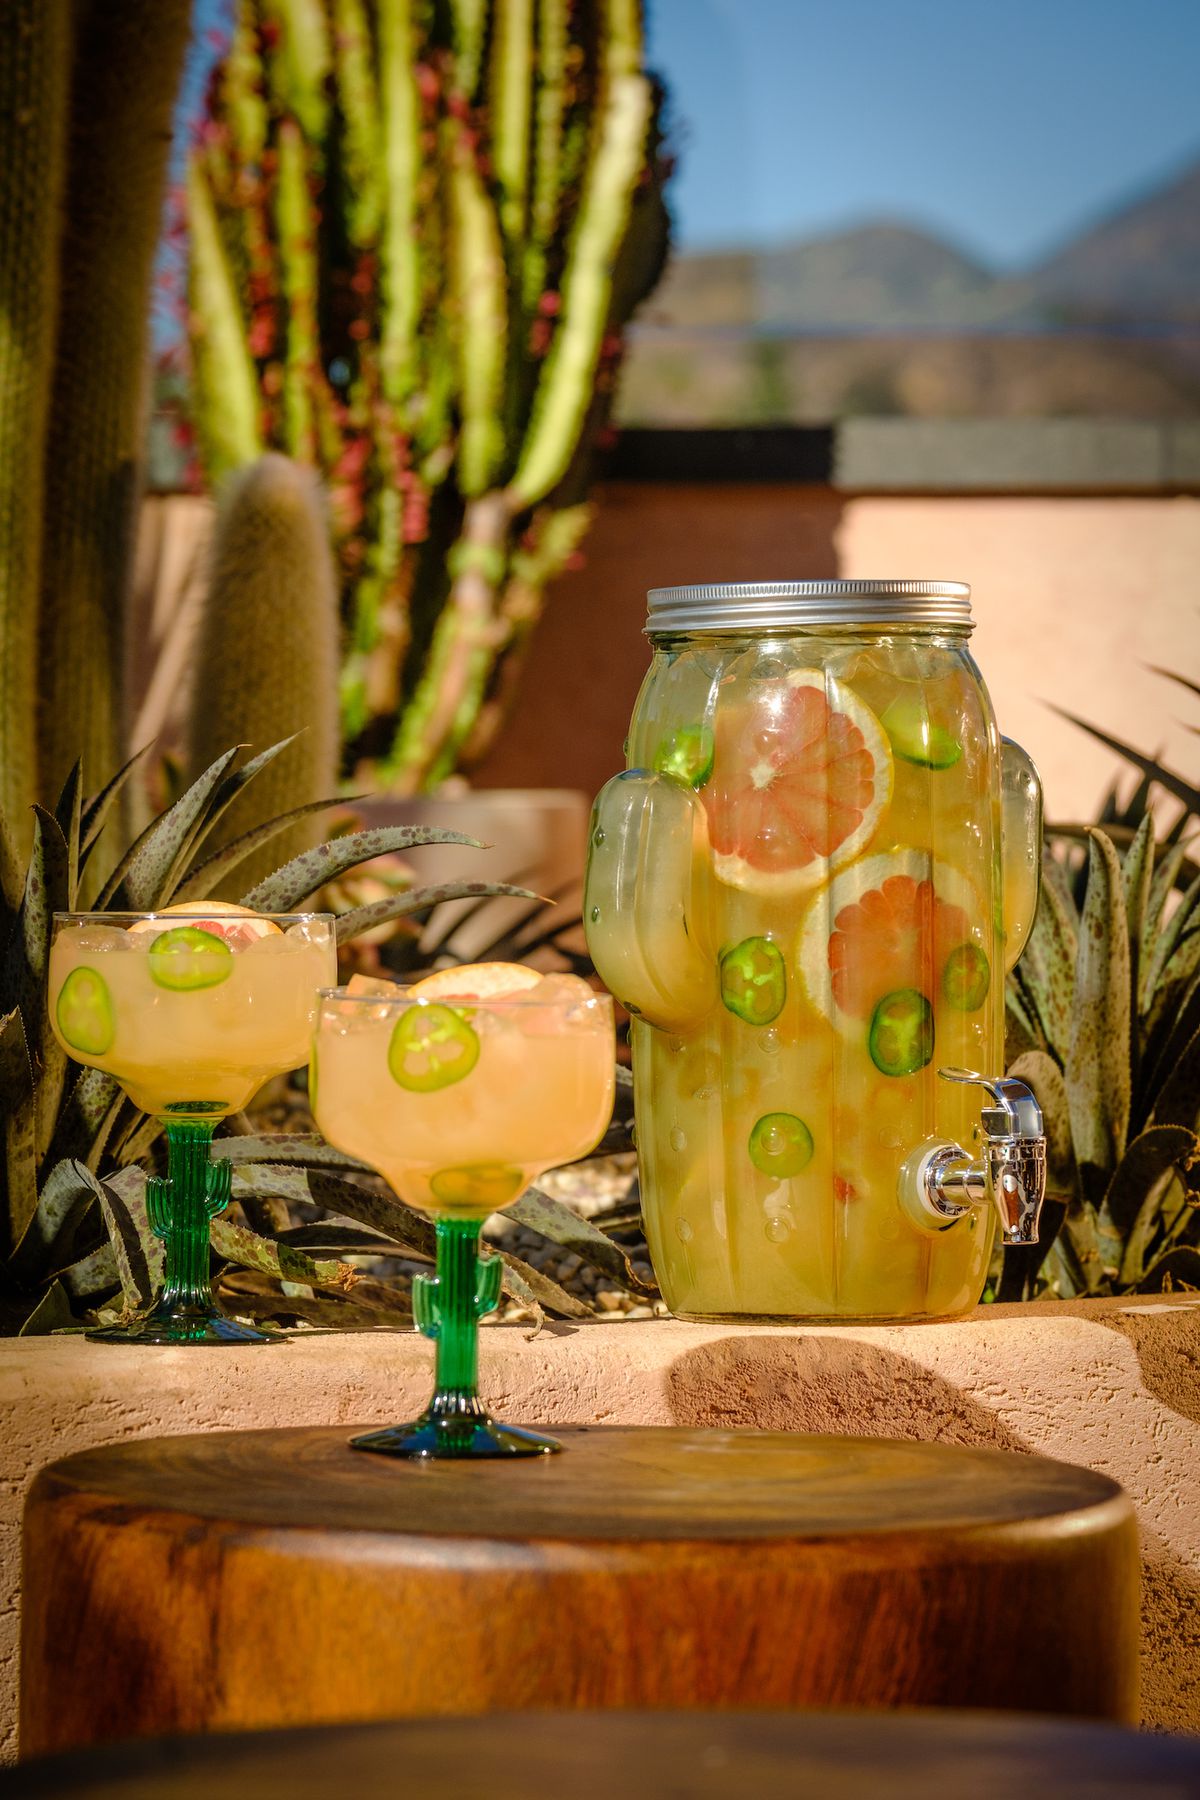 A cactus-shaped vessel holding multiple cocktails while margarita glasses sit beside.